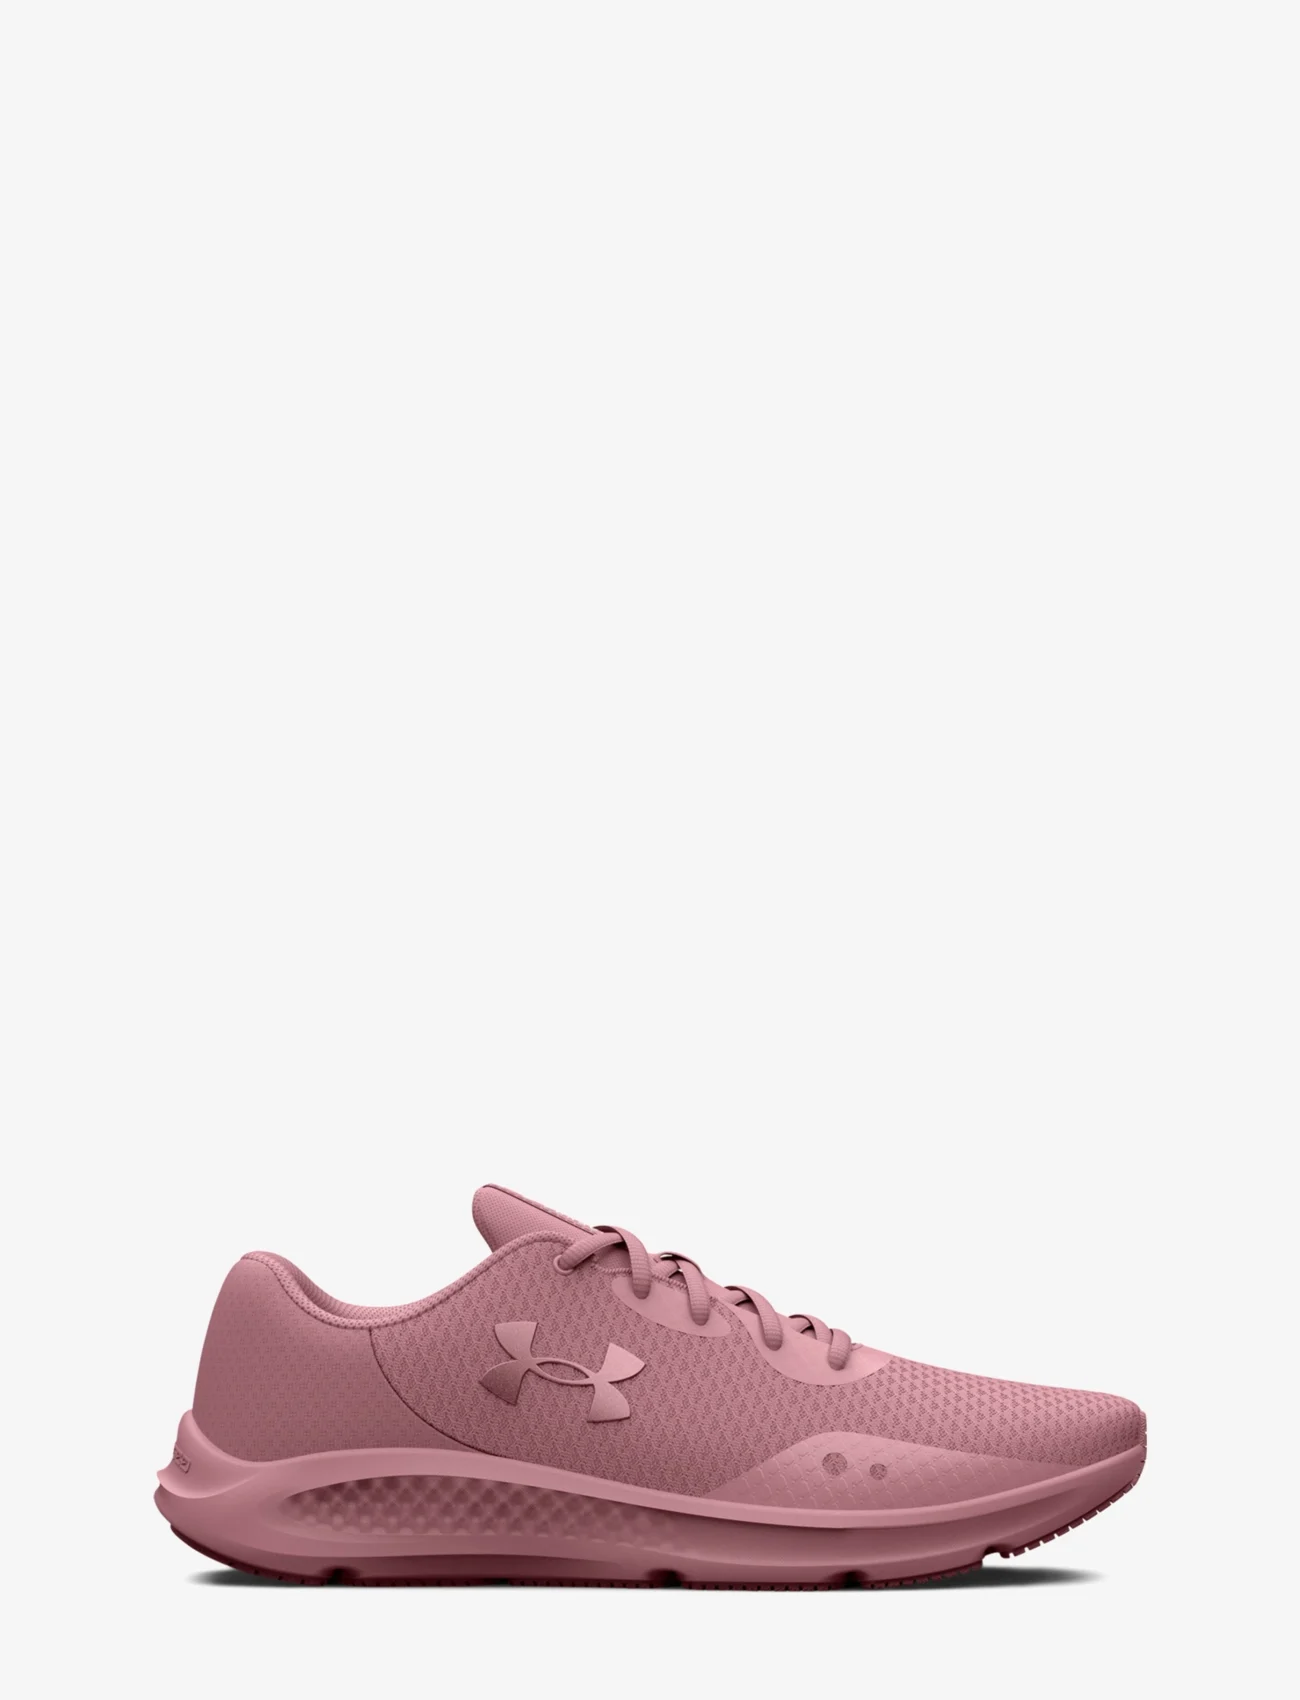 Under Armour - UA W Charged Pursuit 3 - loopschoenen - red - 1